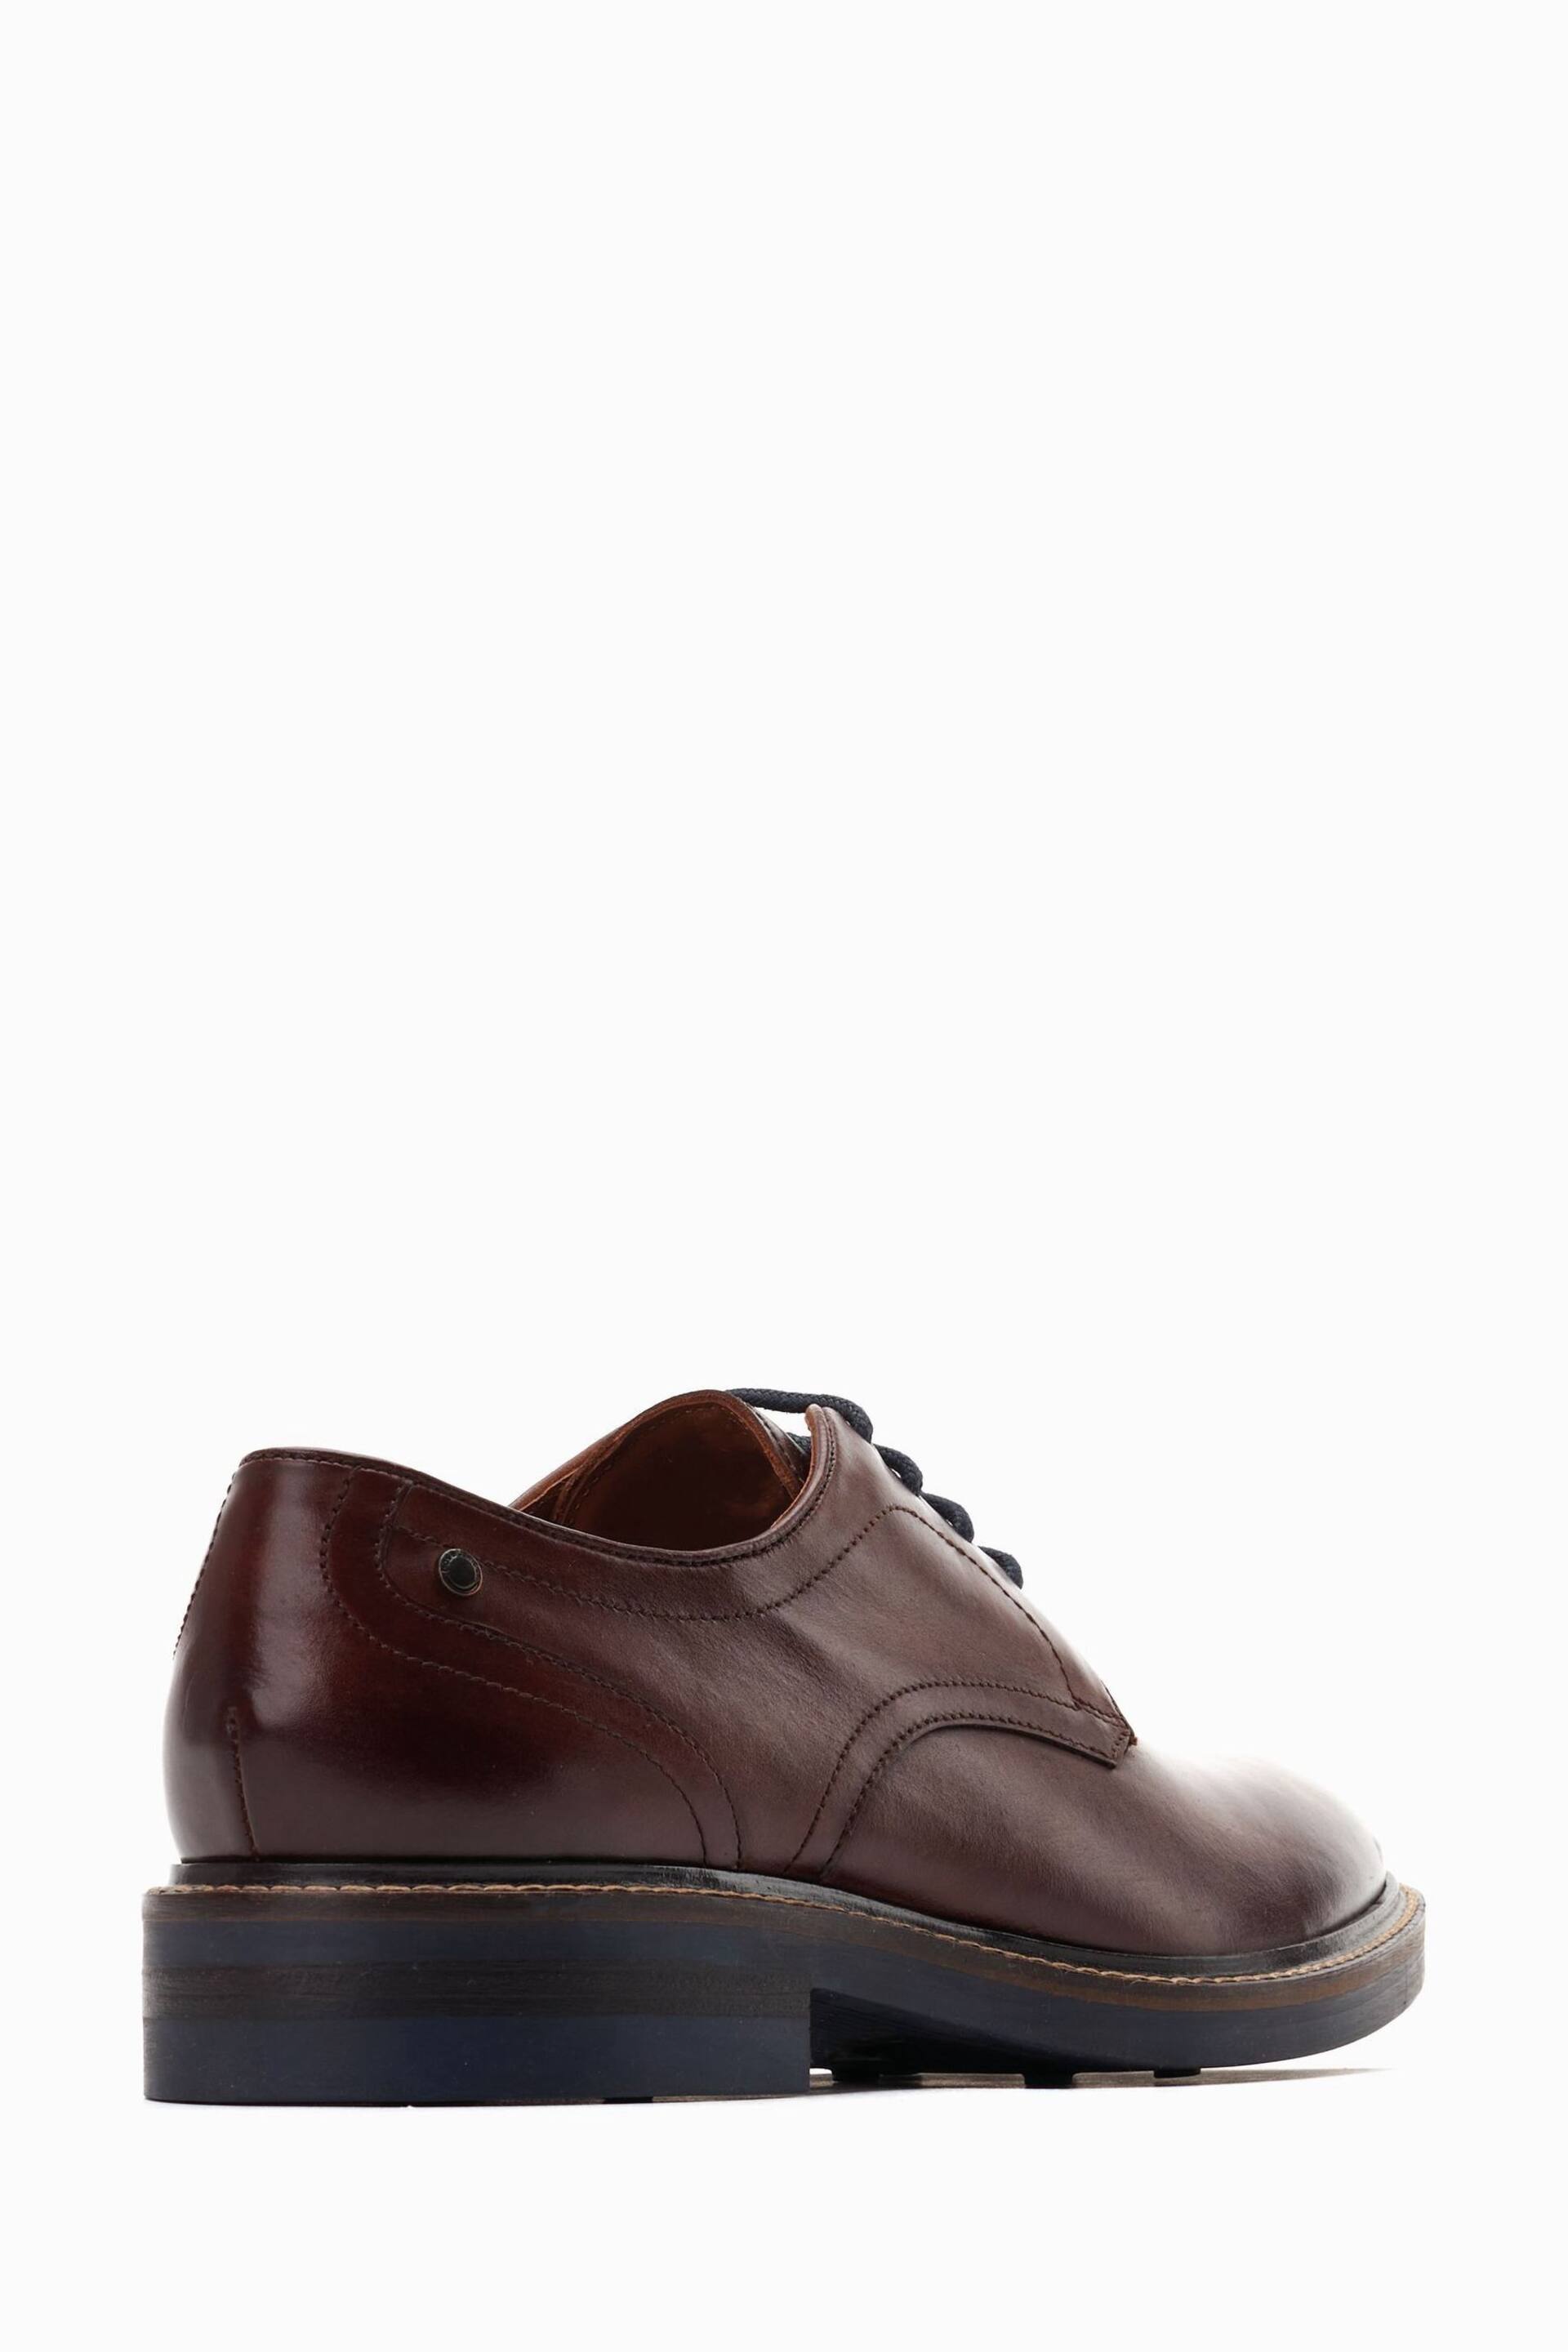 Base London Mawley Lace-Up Derby Shoes - Image 2 of 6